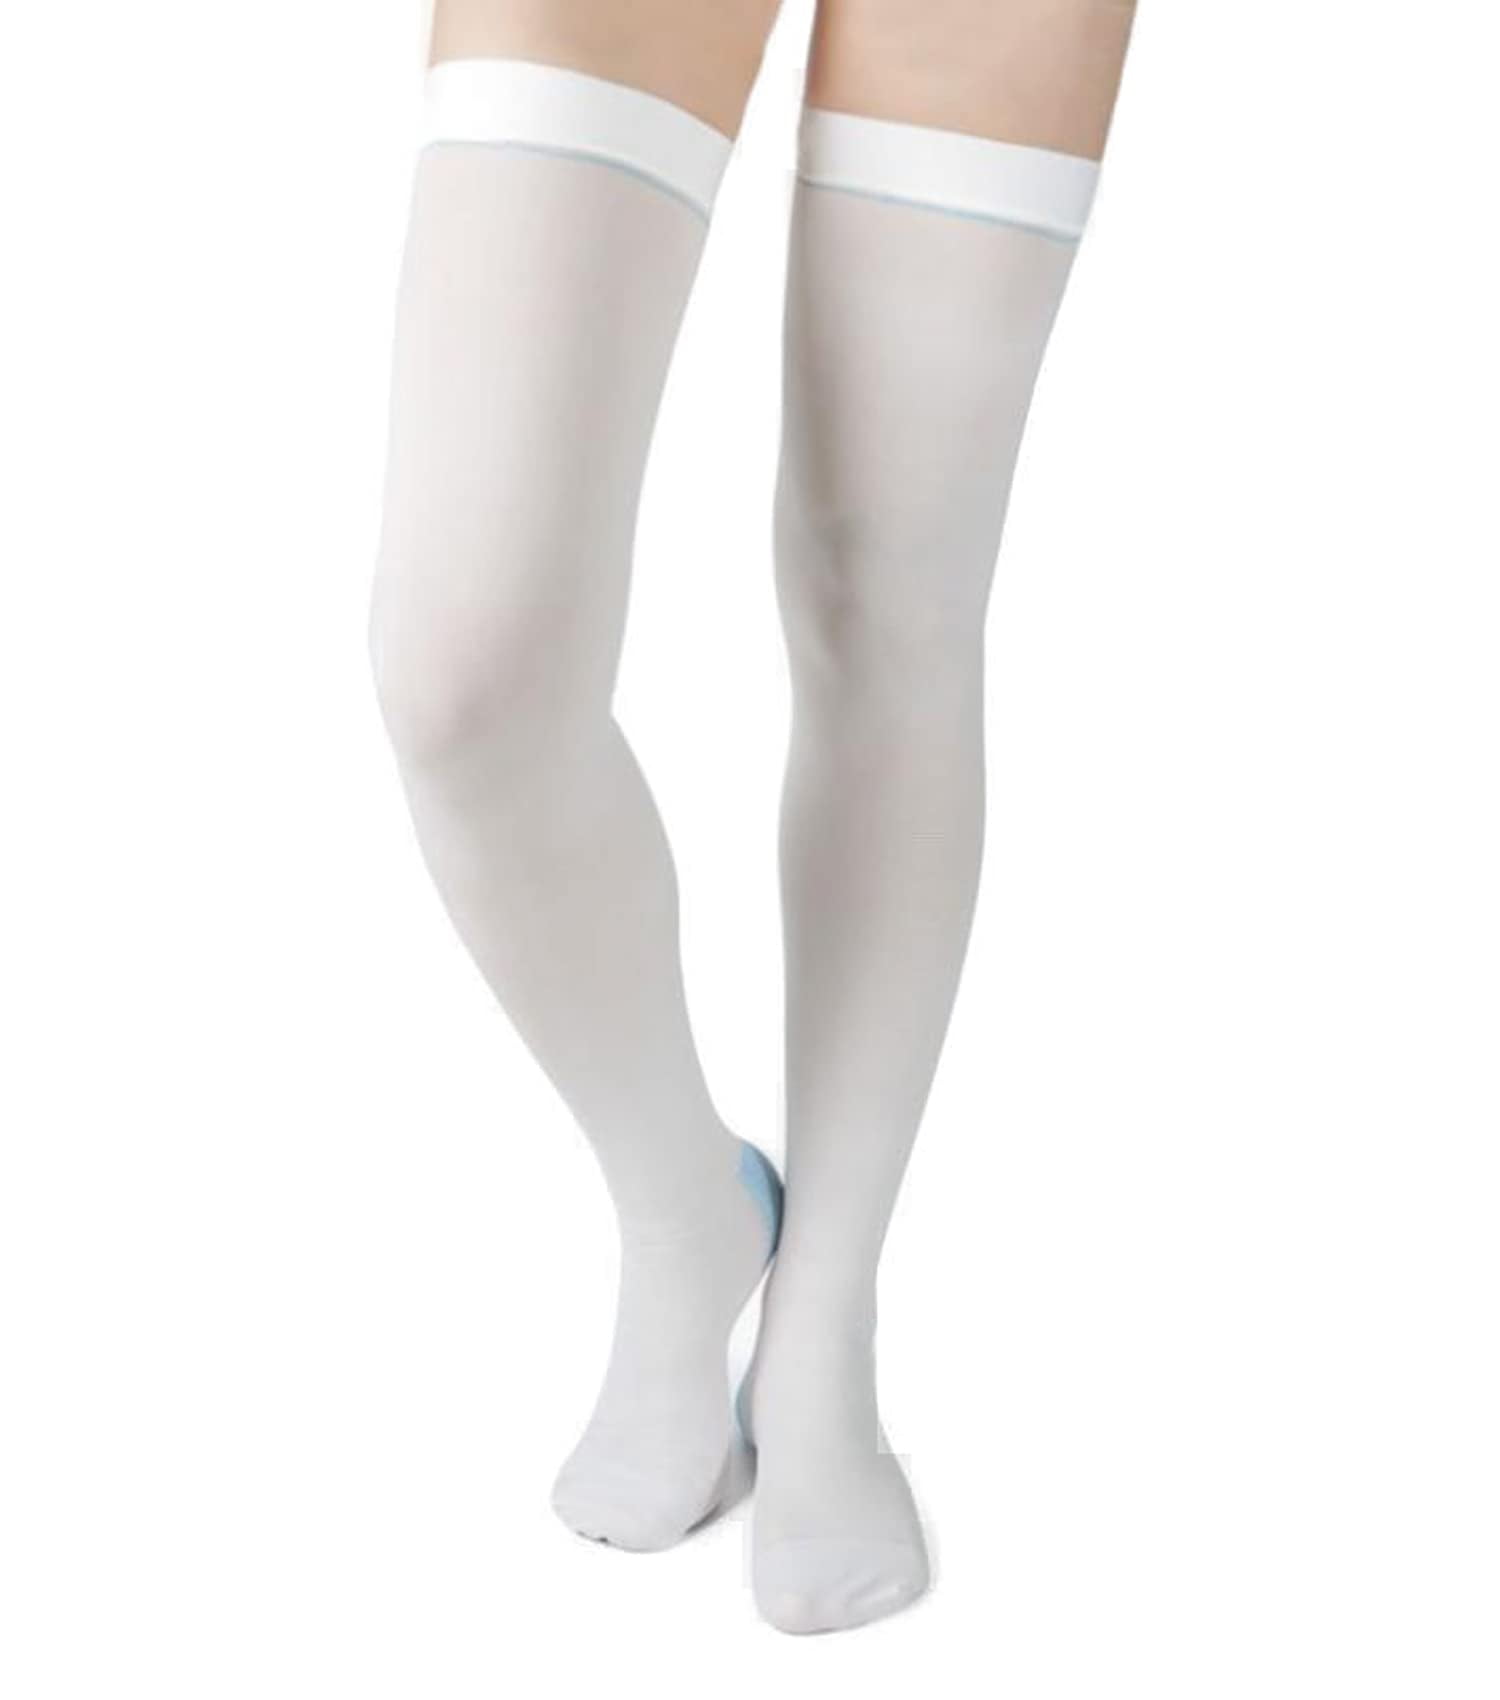 Made in The USA - Absolute Support Medical Grade Compression Socks  10-20mmHg with Open Toe - Anti Embolism Knee Length Stockings, Graduated  Compression for Women and Men - Beige, 2X-Large price in